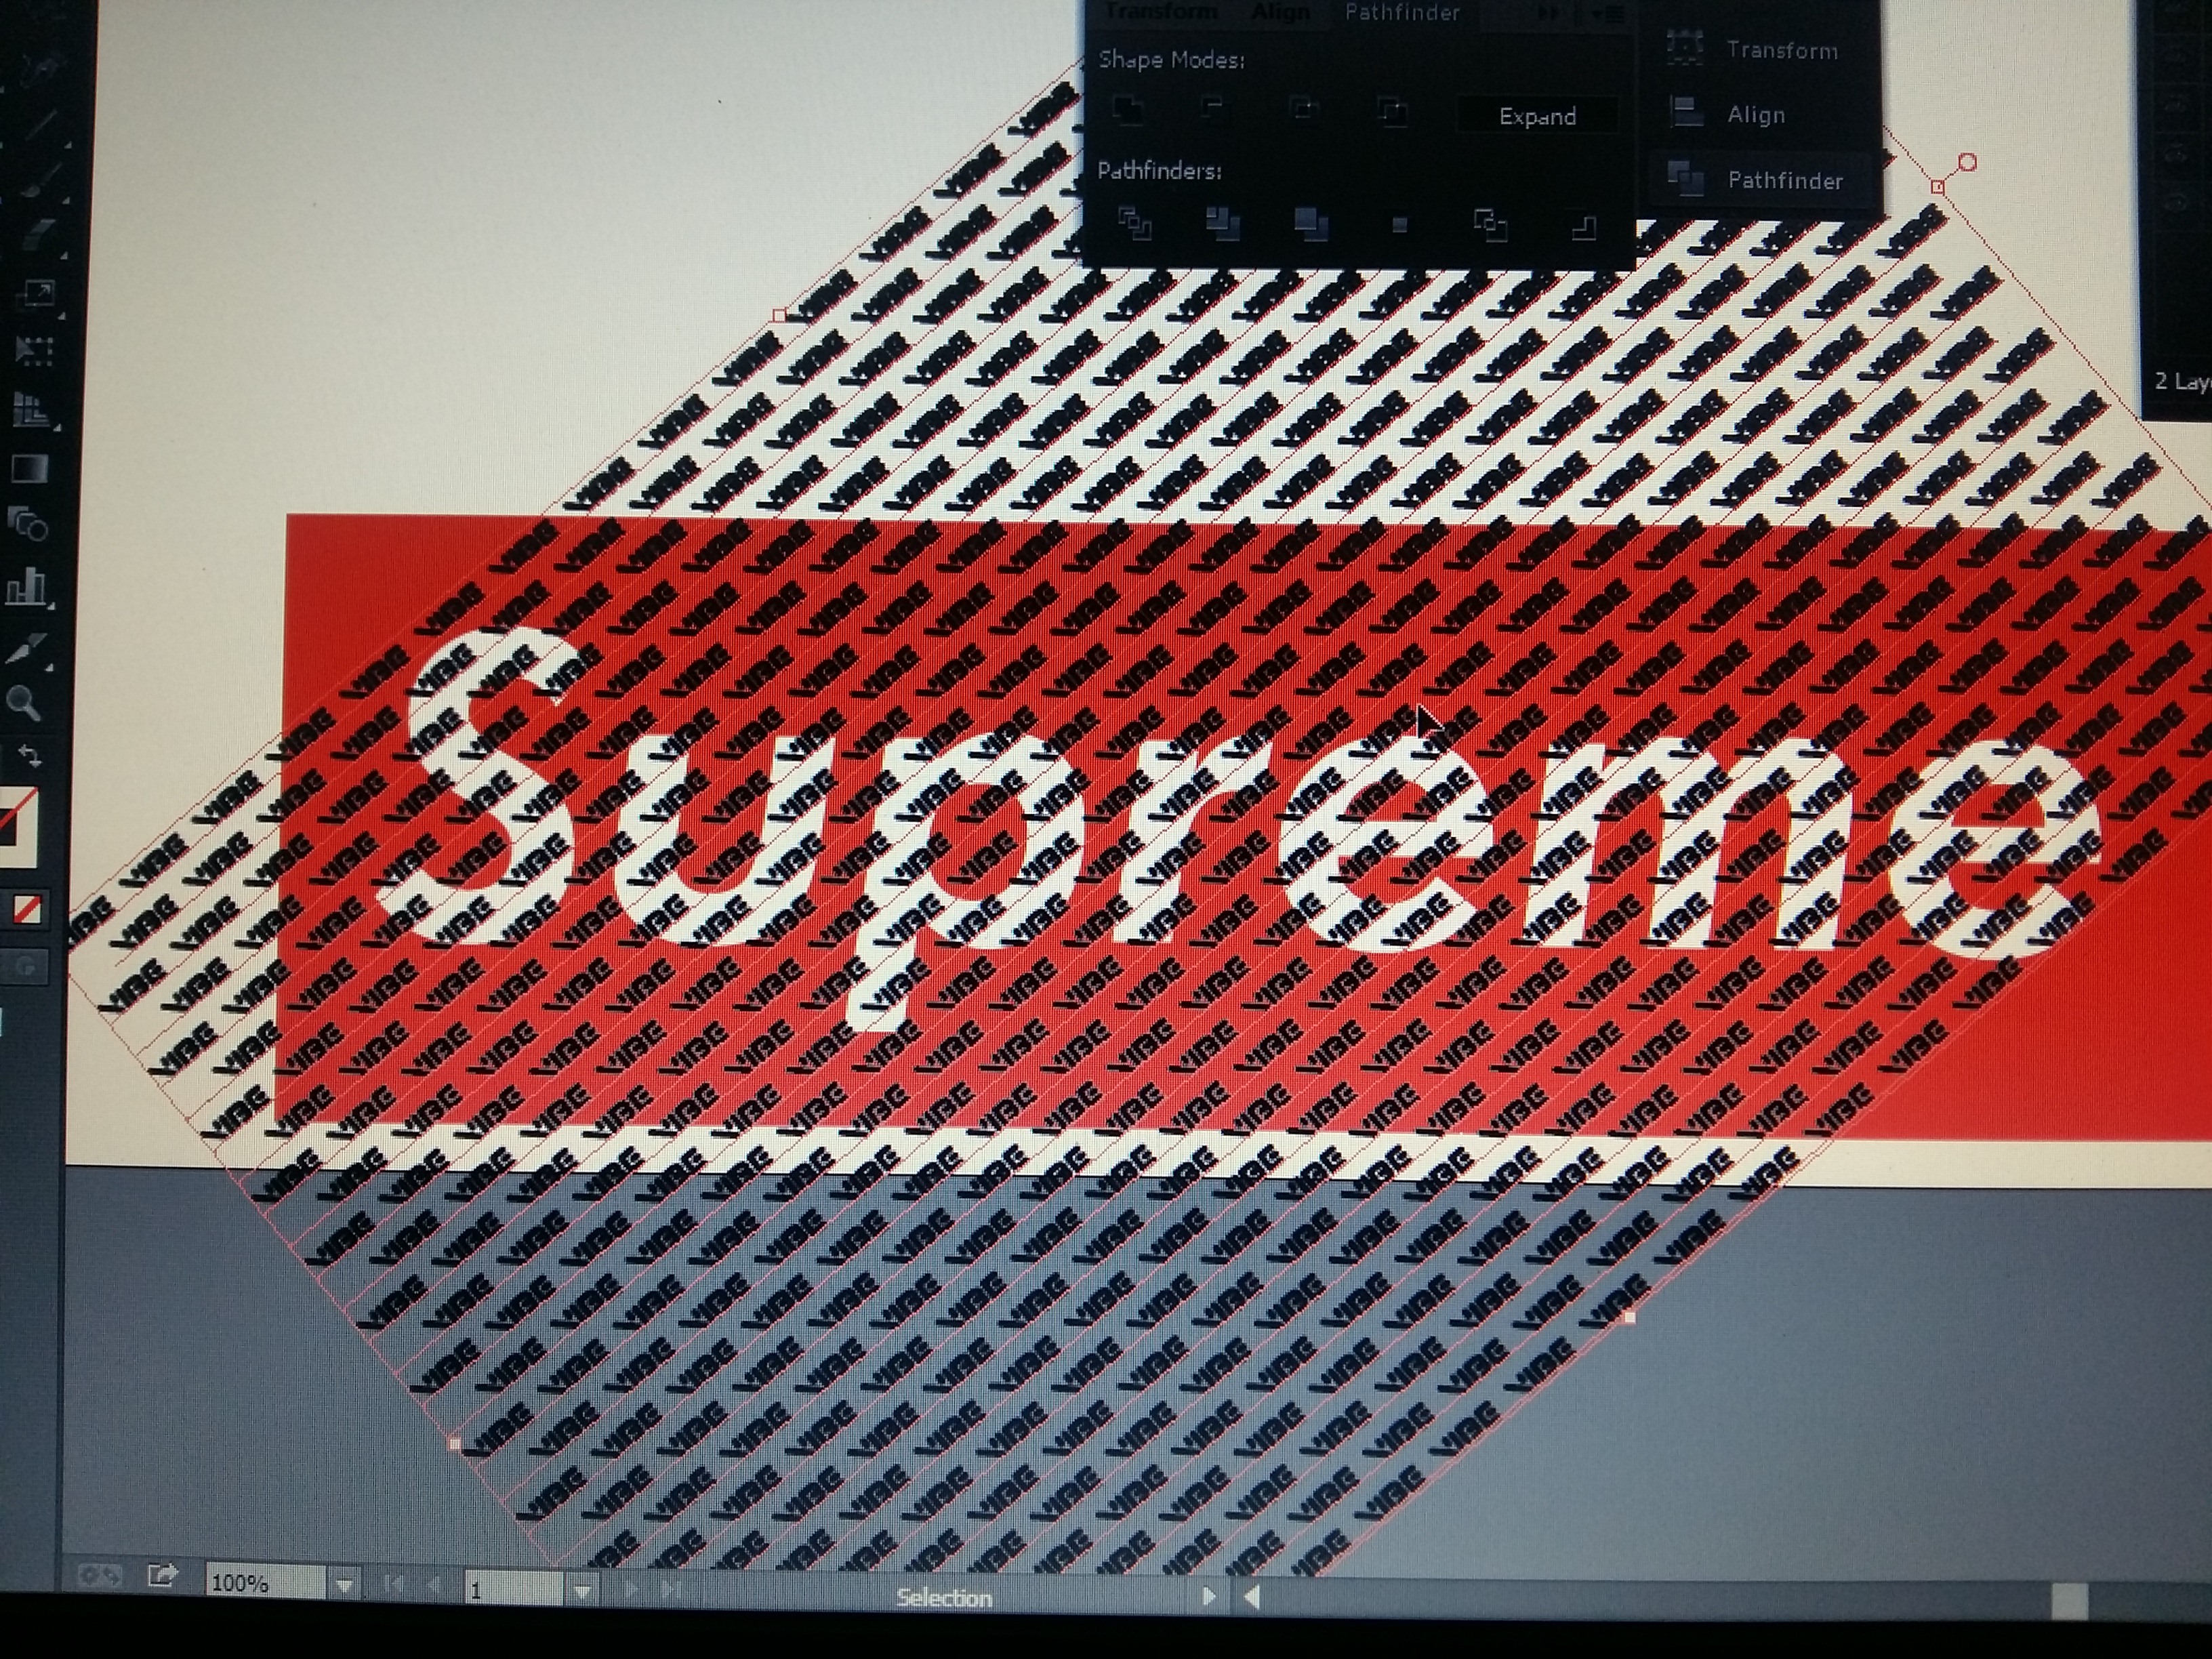 100+] Red Supreme Wallpapers